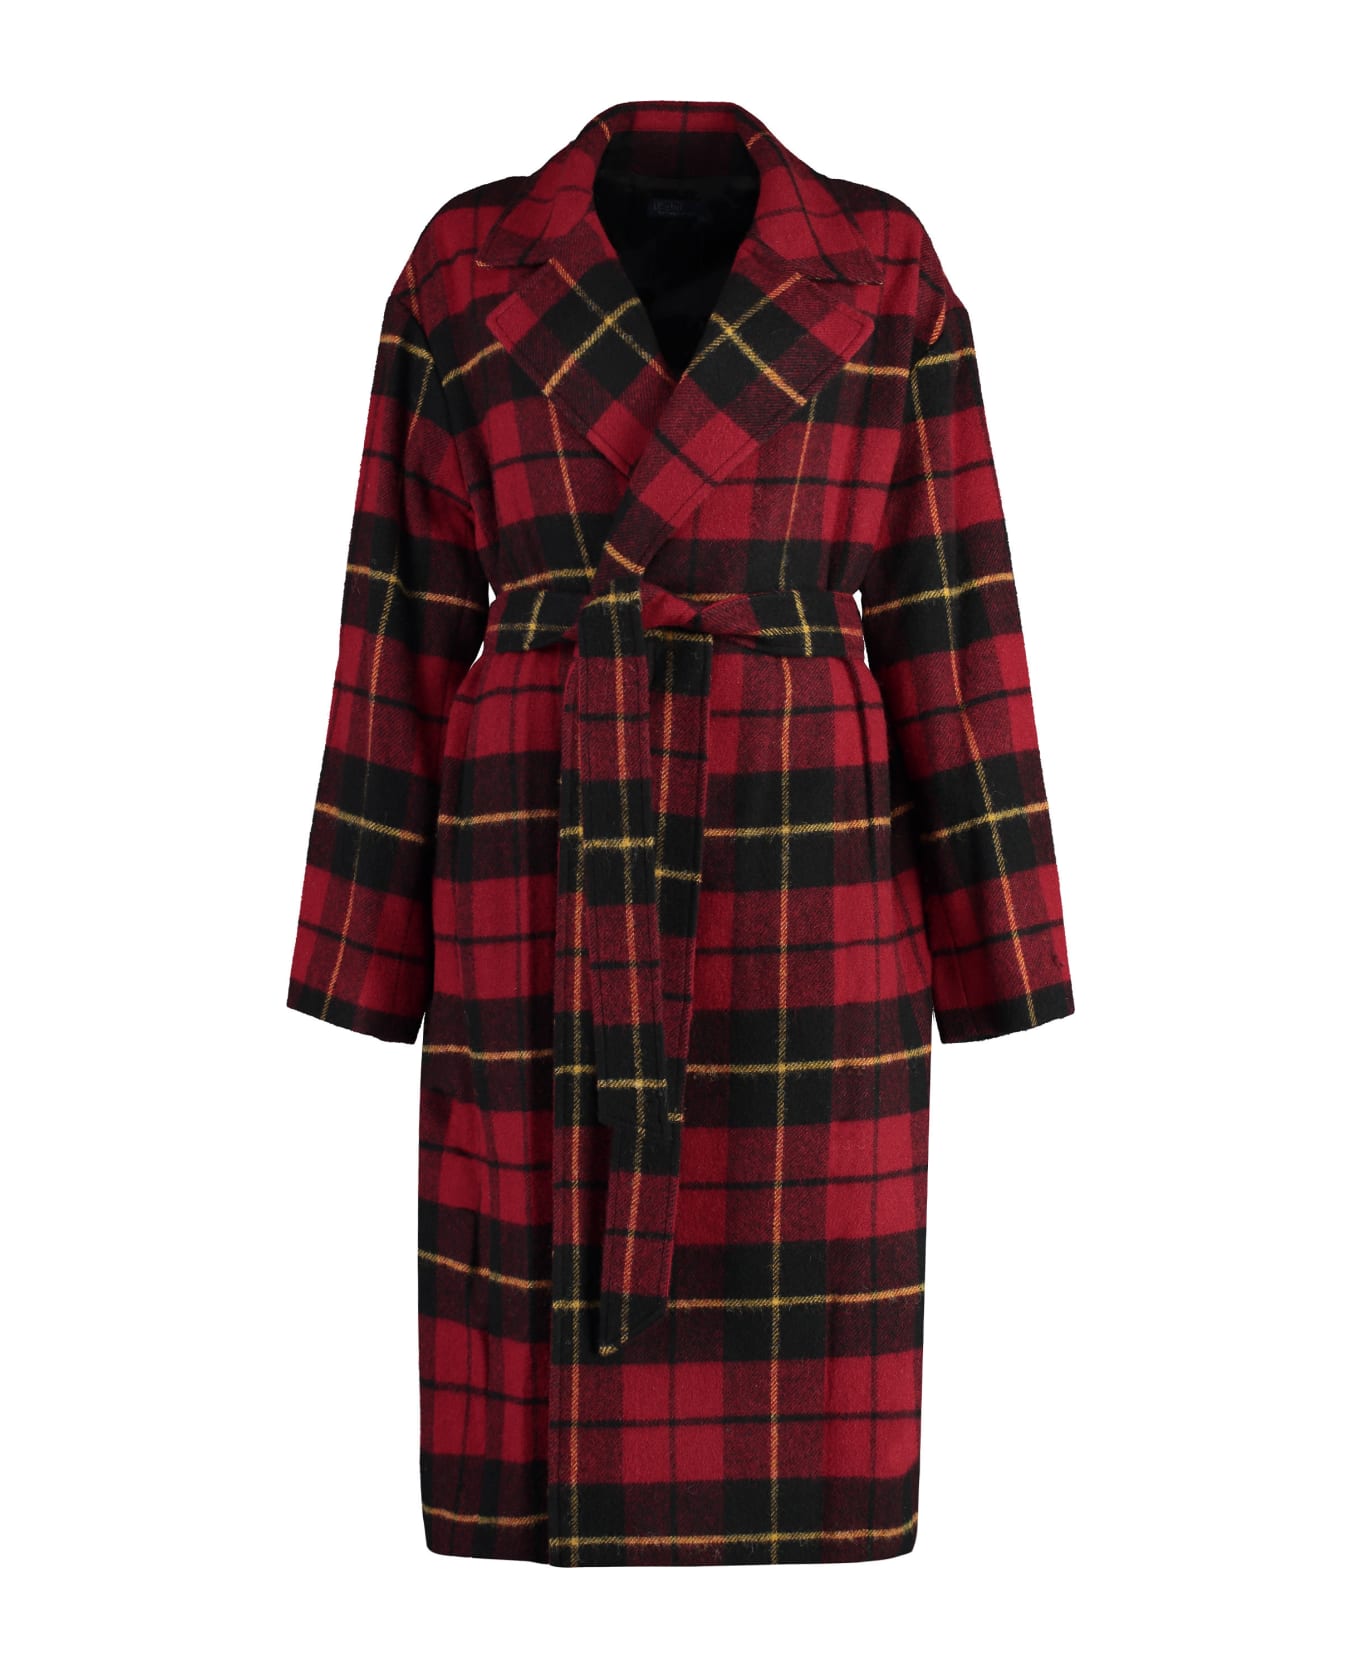 Polo Ralph Lauren Checked Wool Coat - red